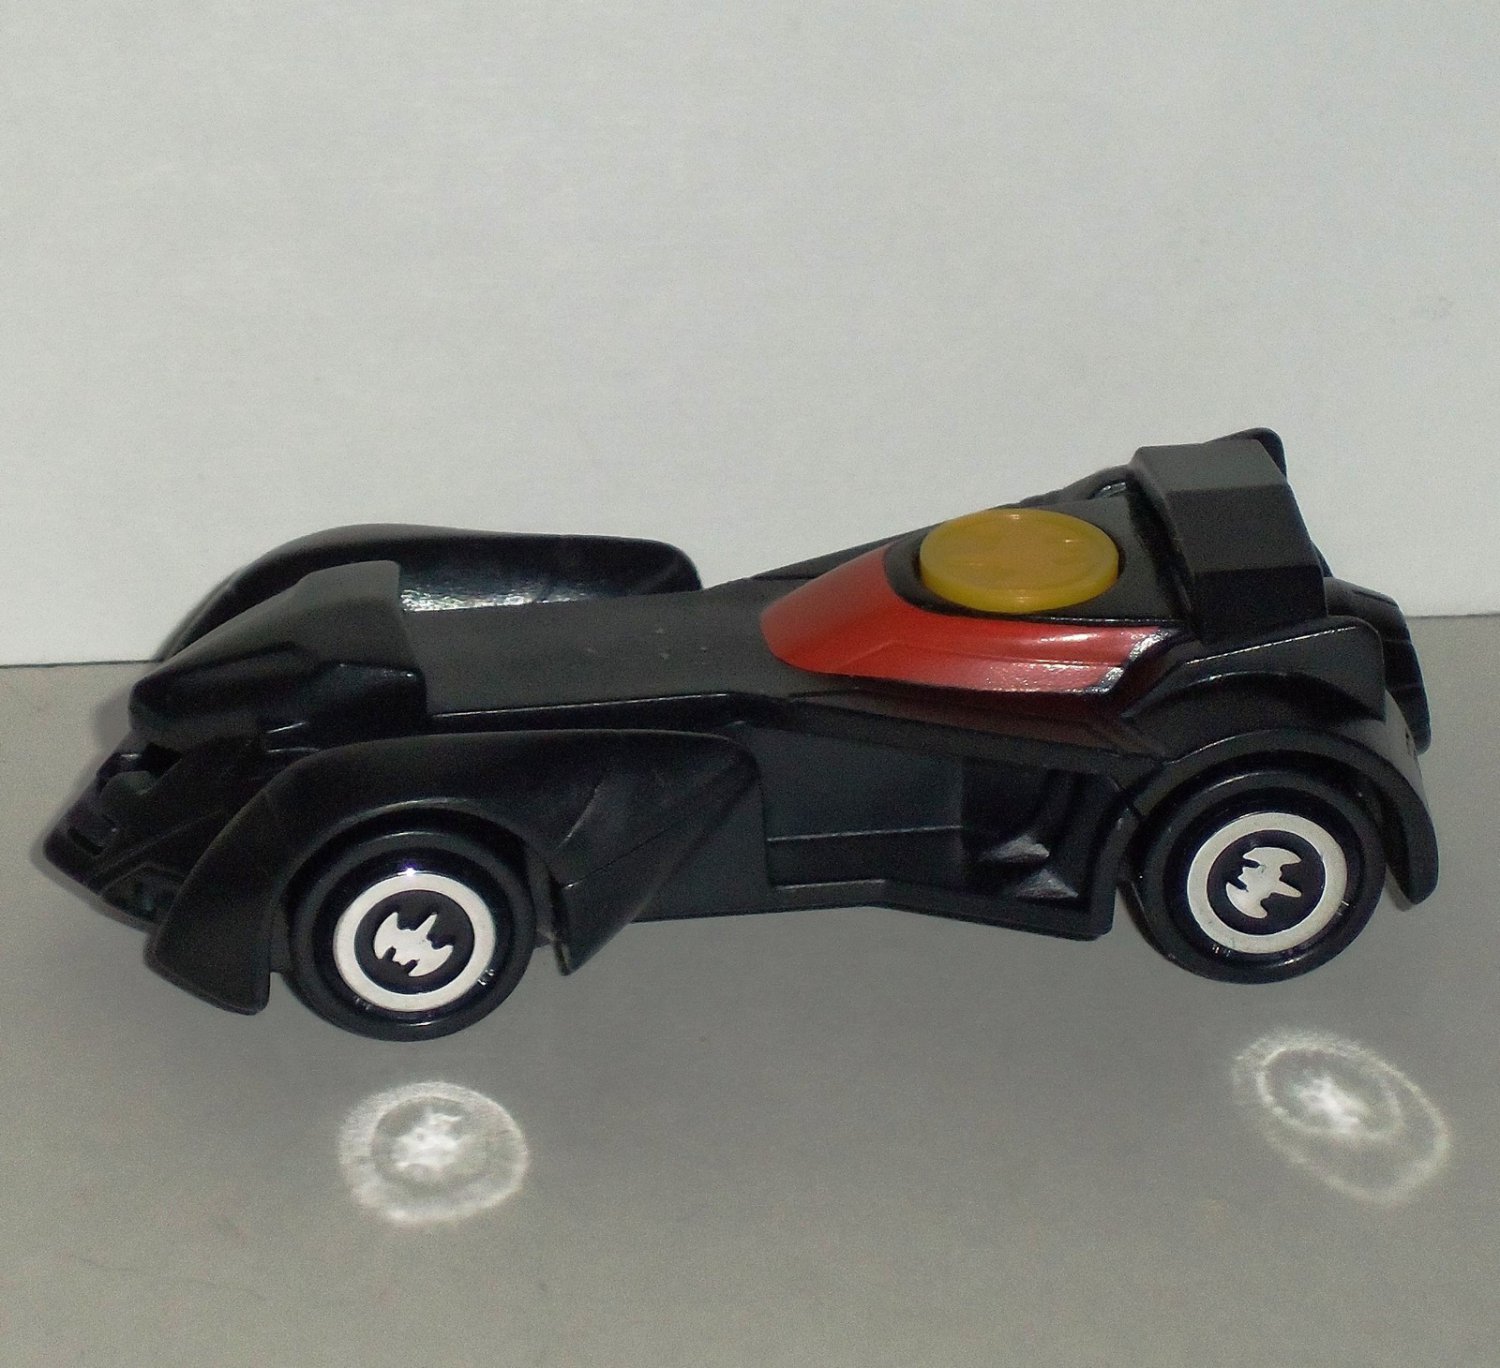 NEW MINT Never Played With Details about   McDonalds Happy Meal Toy-Batman Batmobile Movie Car 